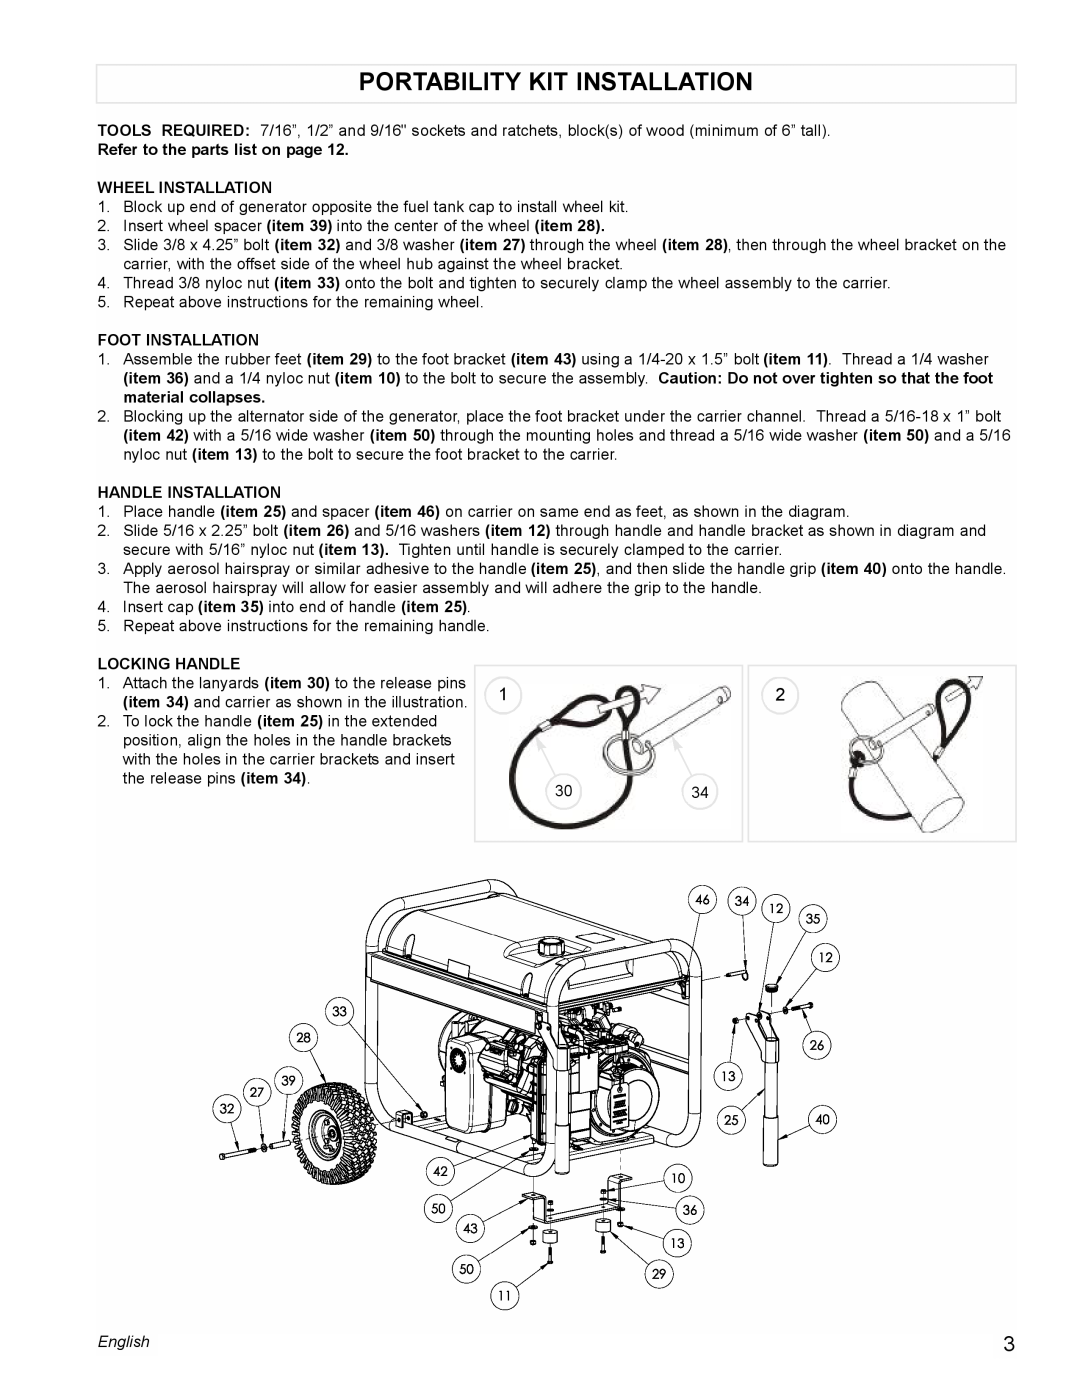 Powermate PM0676800 Portability Kit Installation, Refer to the parts list on page, Wheel Installation, Foot Installation 